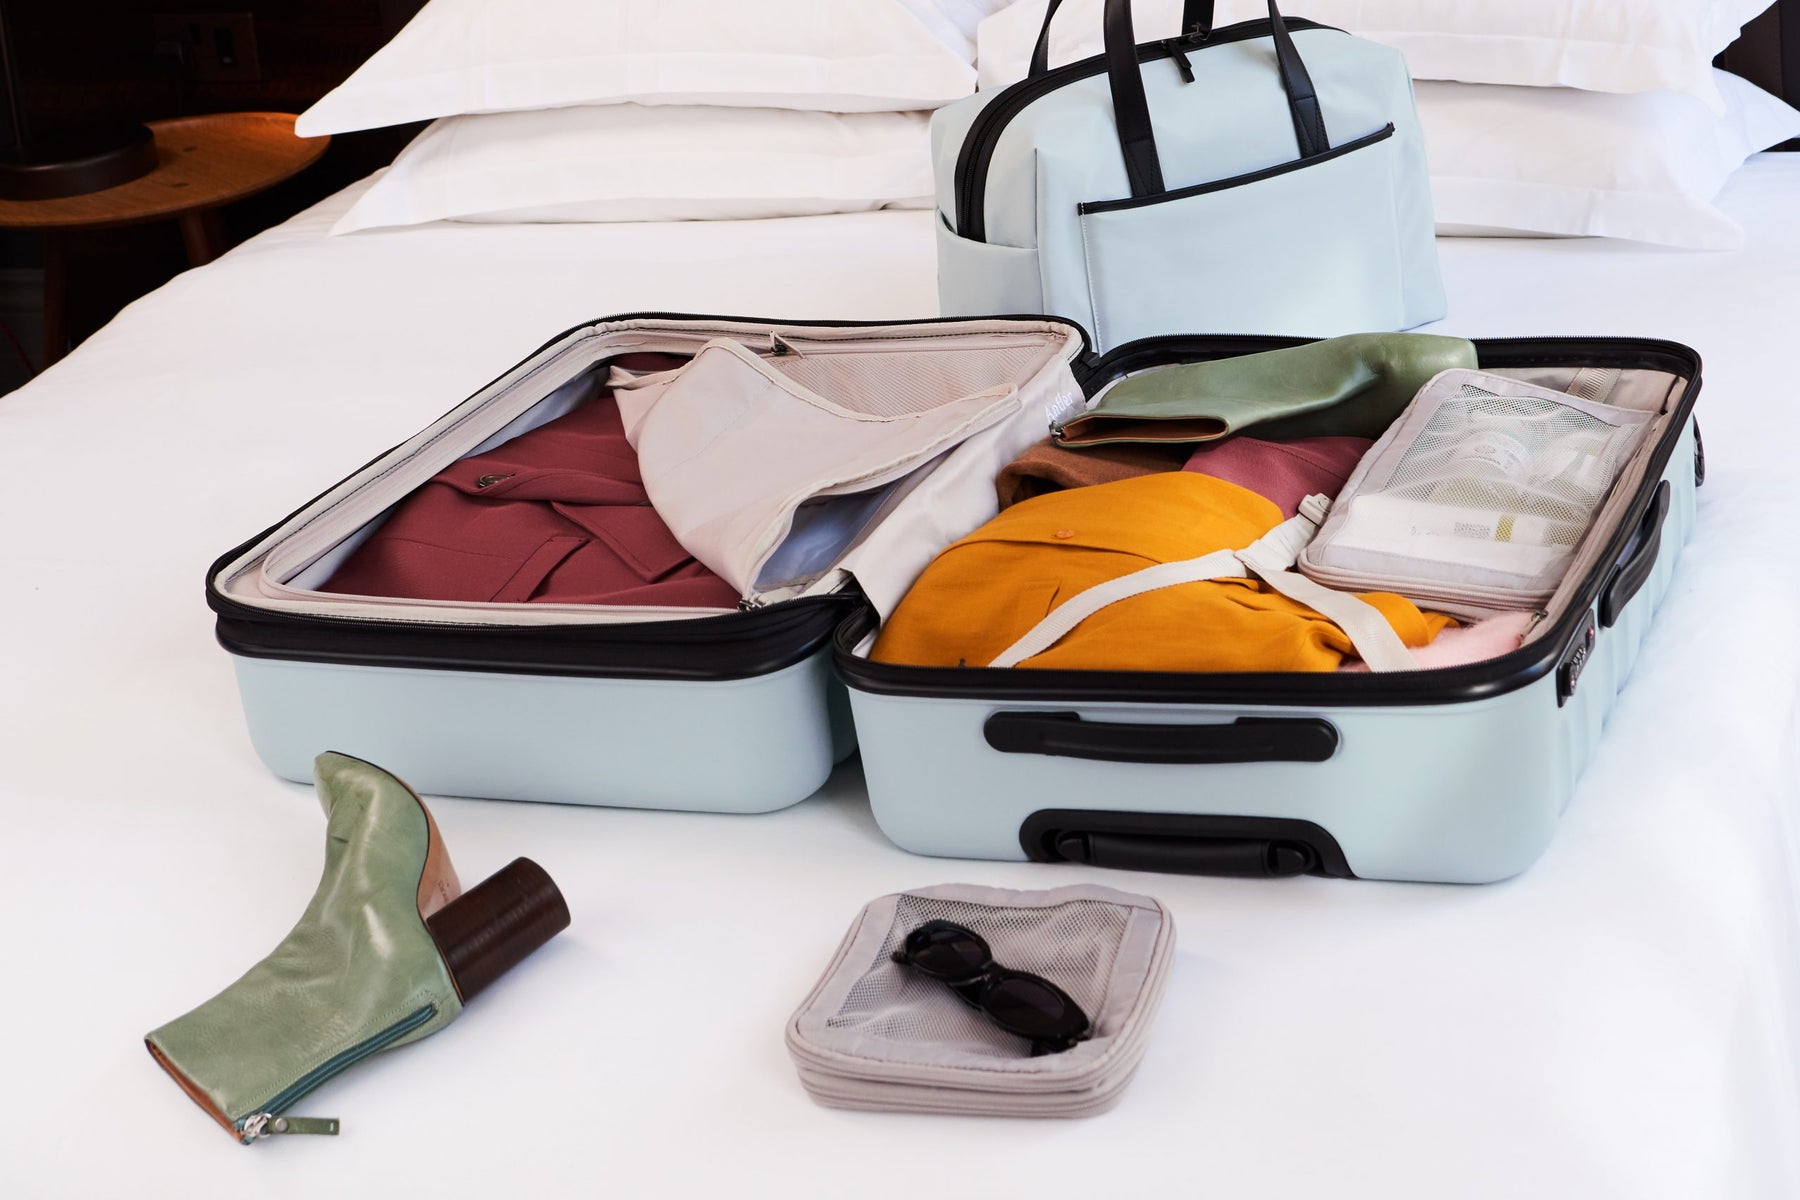 The travel hack you’ll wonder how you lived without